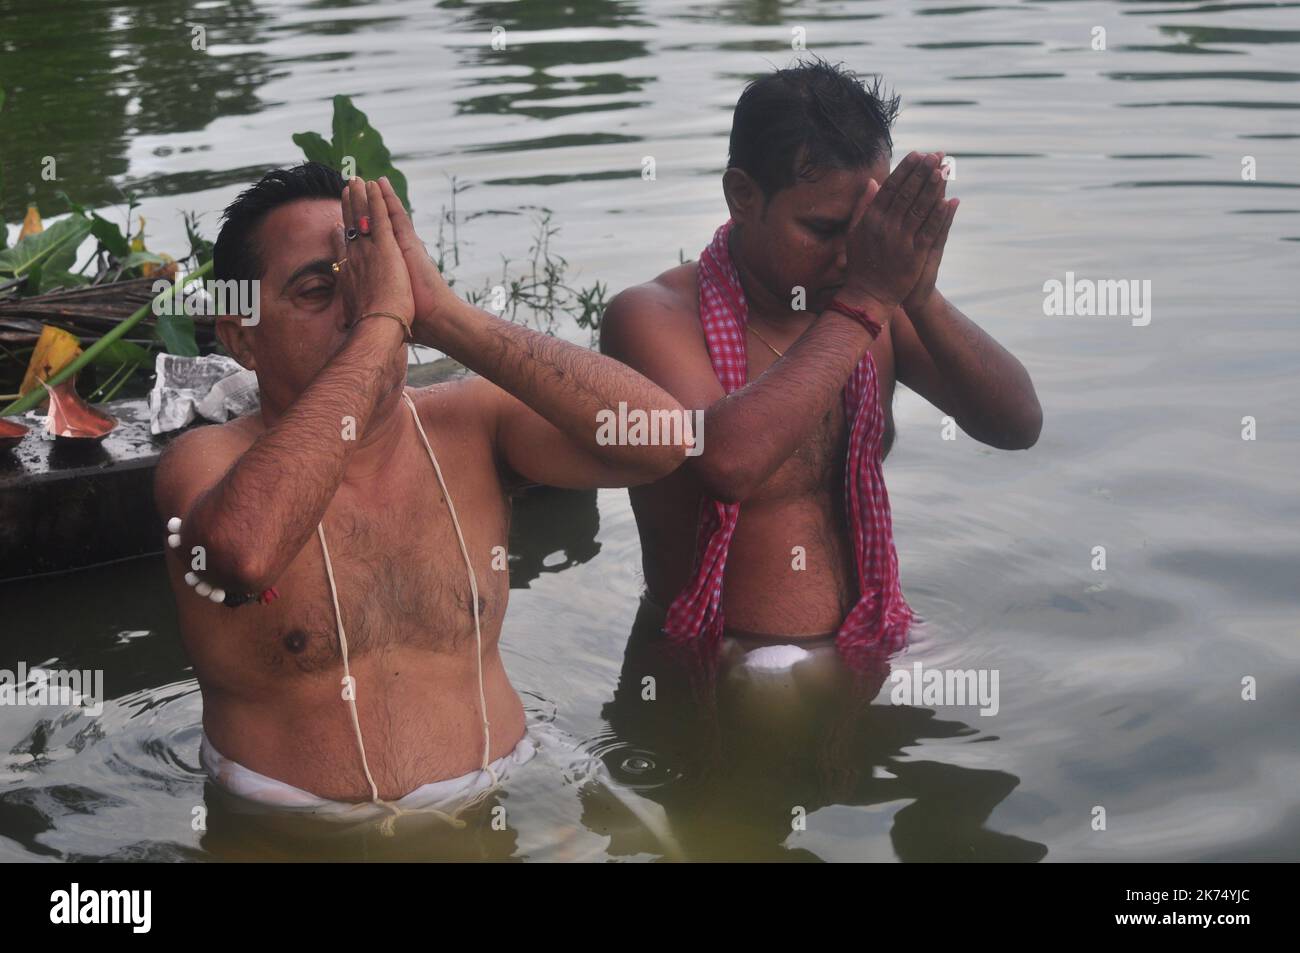 Indian Hindu devotees perform Tarpan, also known as Pitritarpan in Tripura. Tarpan is a ritual to pay obeisance to one's forfathers, and on its last day on September 19, 2017, they prayed their ancestors. In Hindu mythology, this day is also called -Mahalaya- and described as the day when the Gods created the ten armed Godess Durga to destroy the demon king Asur who plotted to drive out the gods from their kingdom. During this five-day period, they worship of Durga, who is recognized as the destroyer of evil. Stock Photo